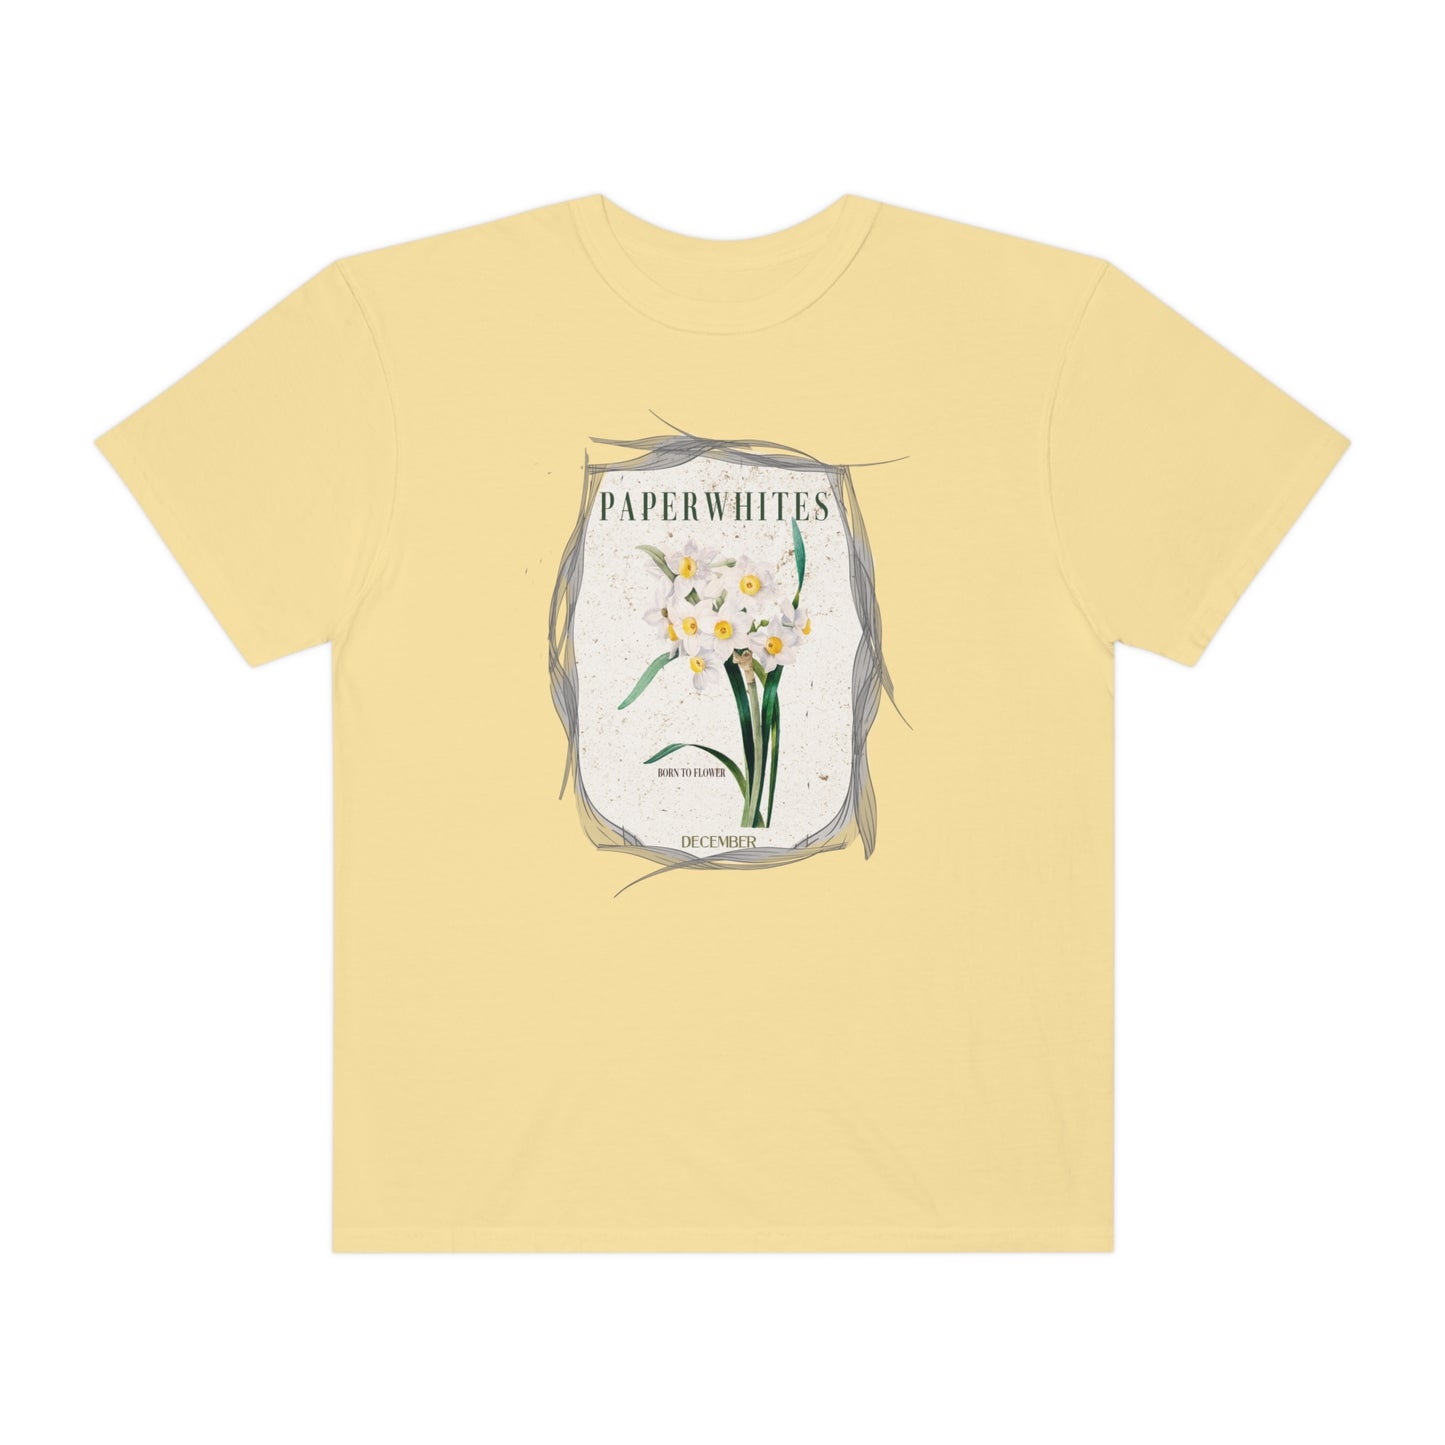 born to flower graphic tee - december